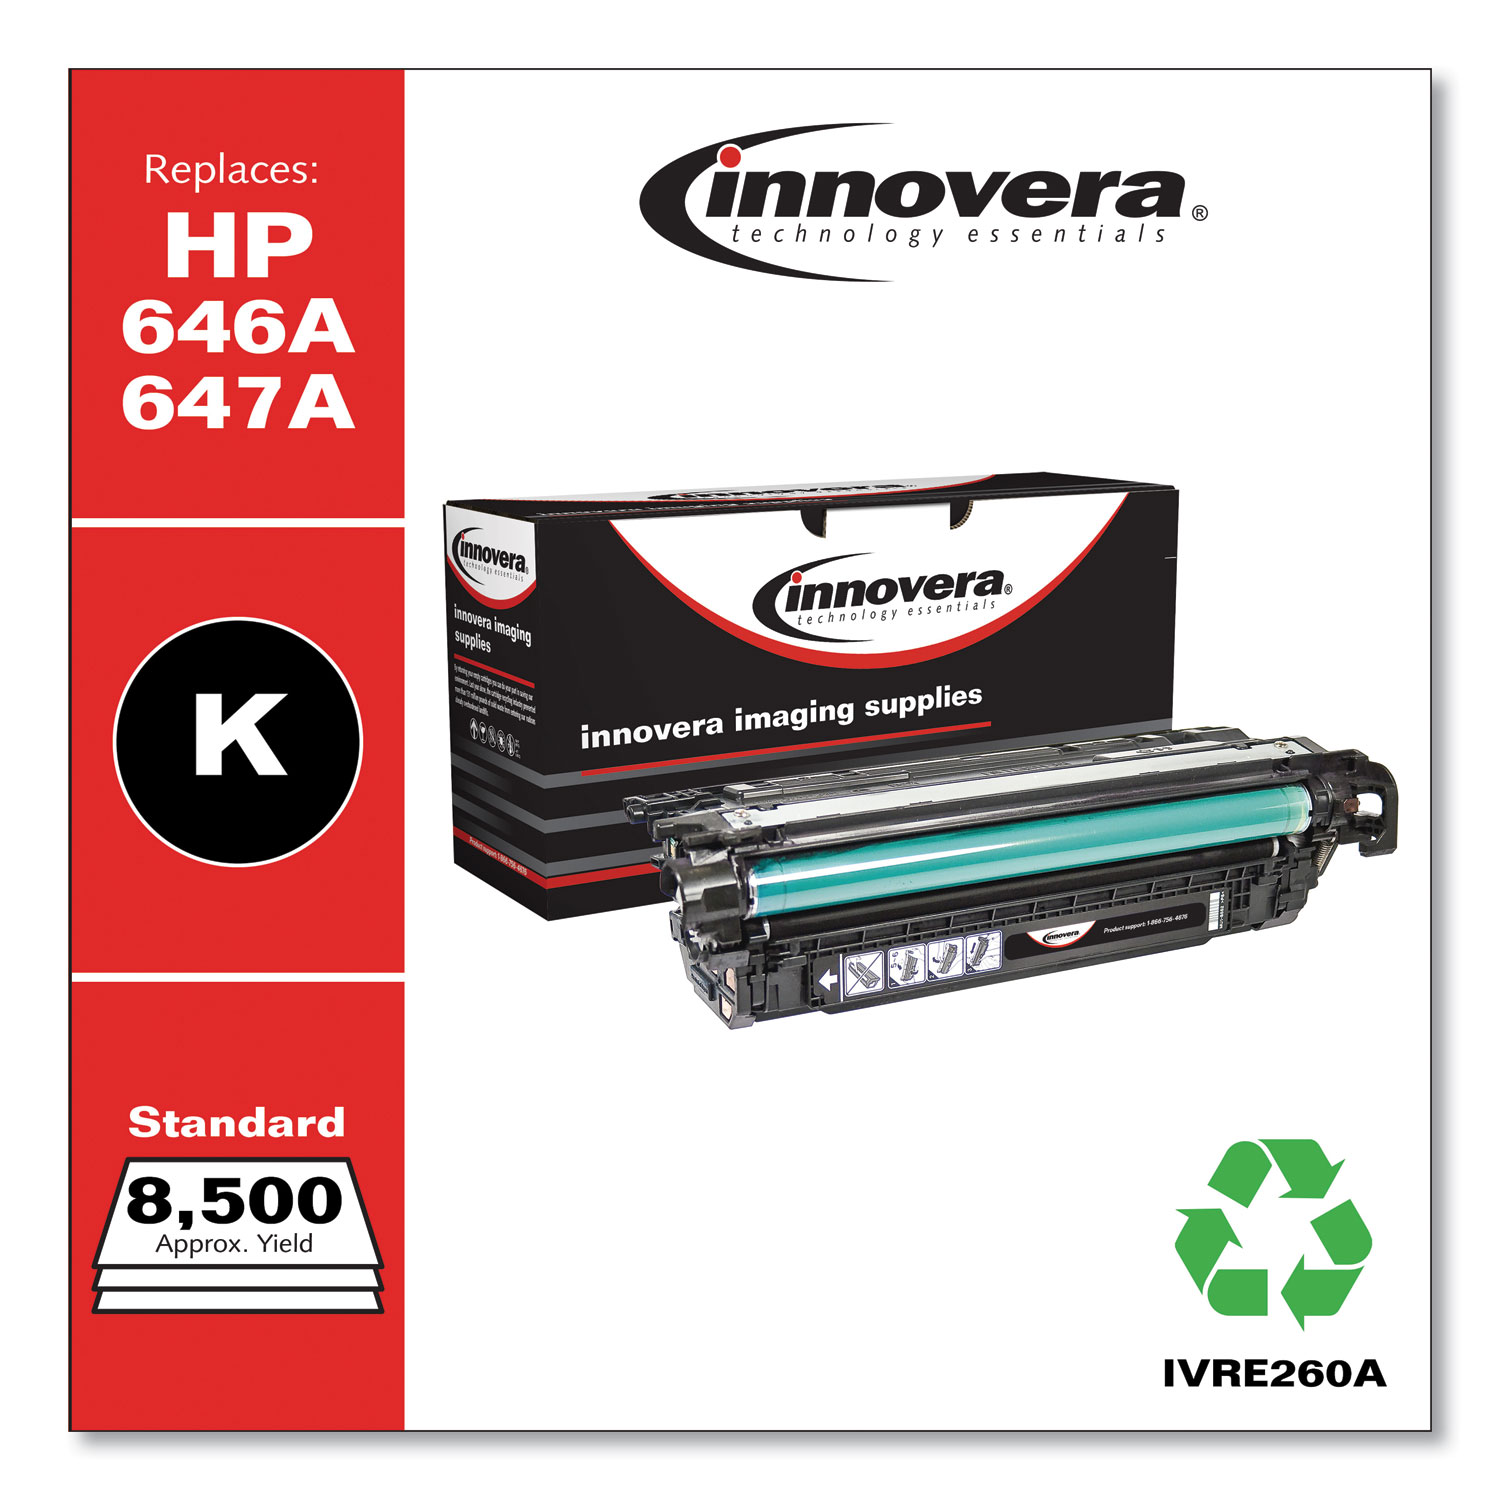  Innovera IVRE260A Remanufactured CE260A (647A) Toner, 8500 Page-Yield, Black (IVRE260A) 